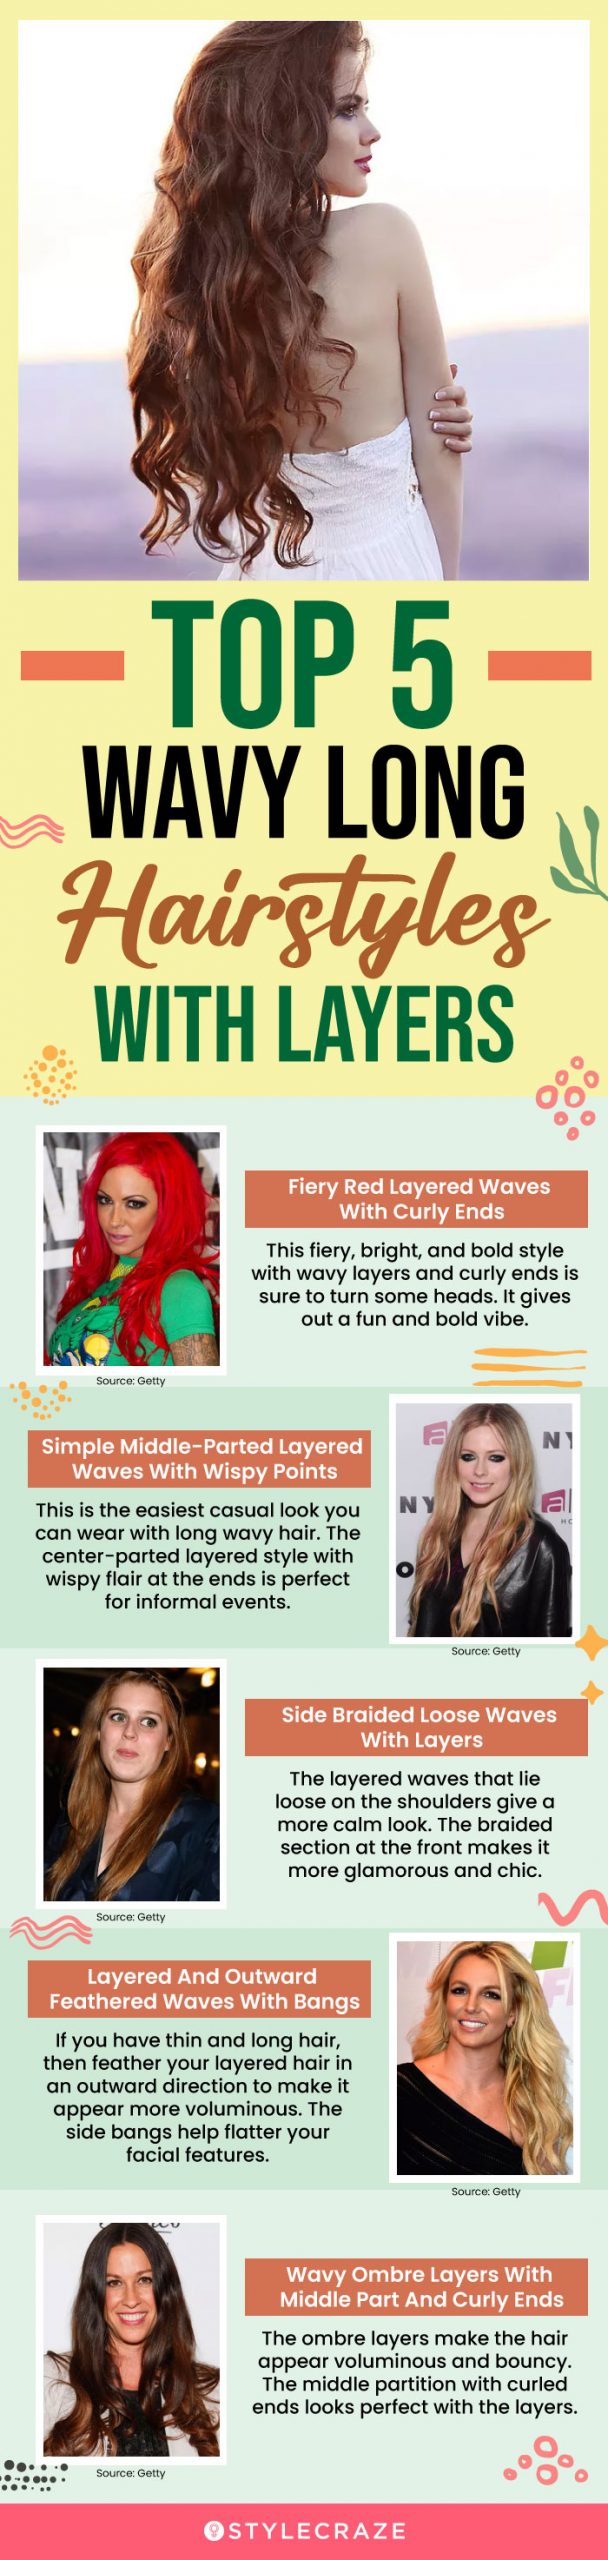 top 5 wavy long hairstyles with layers(infographic)